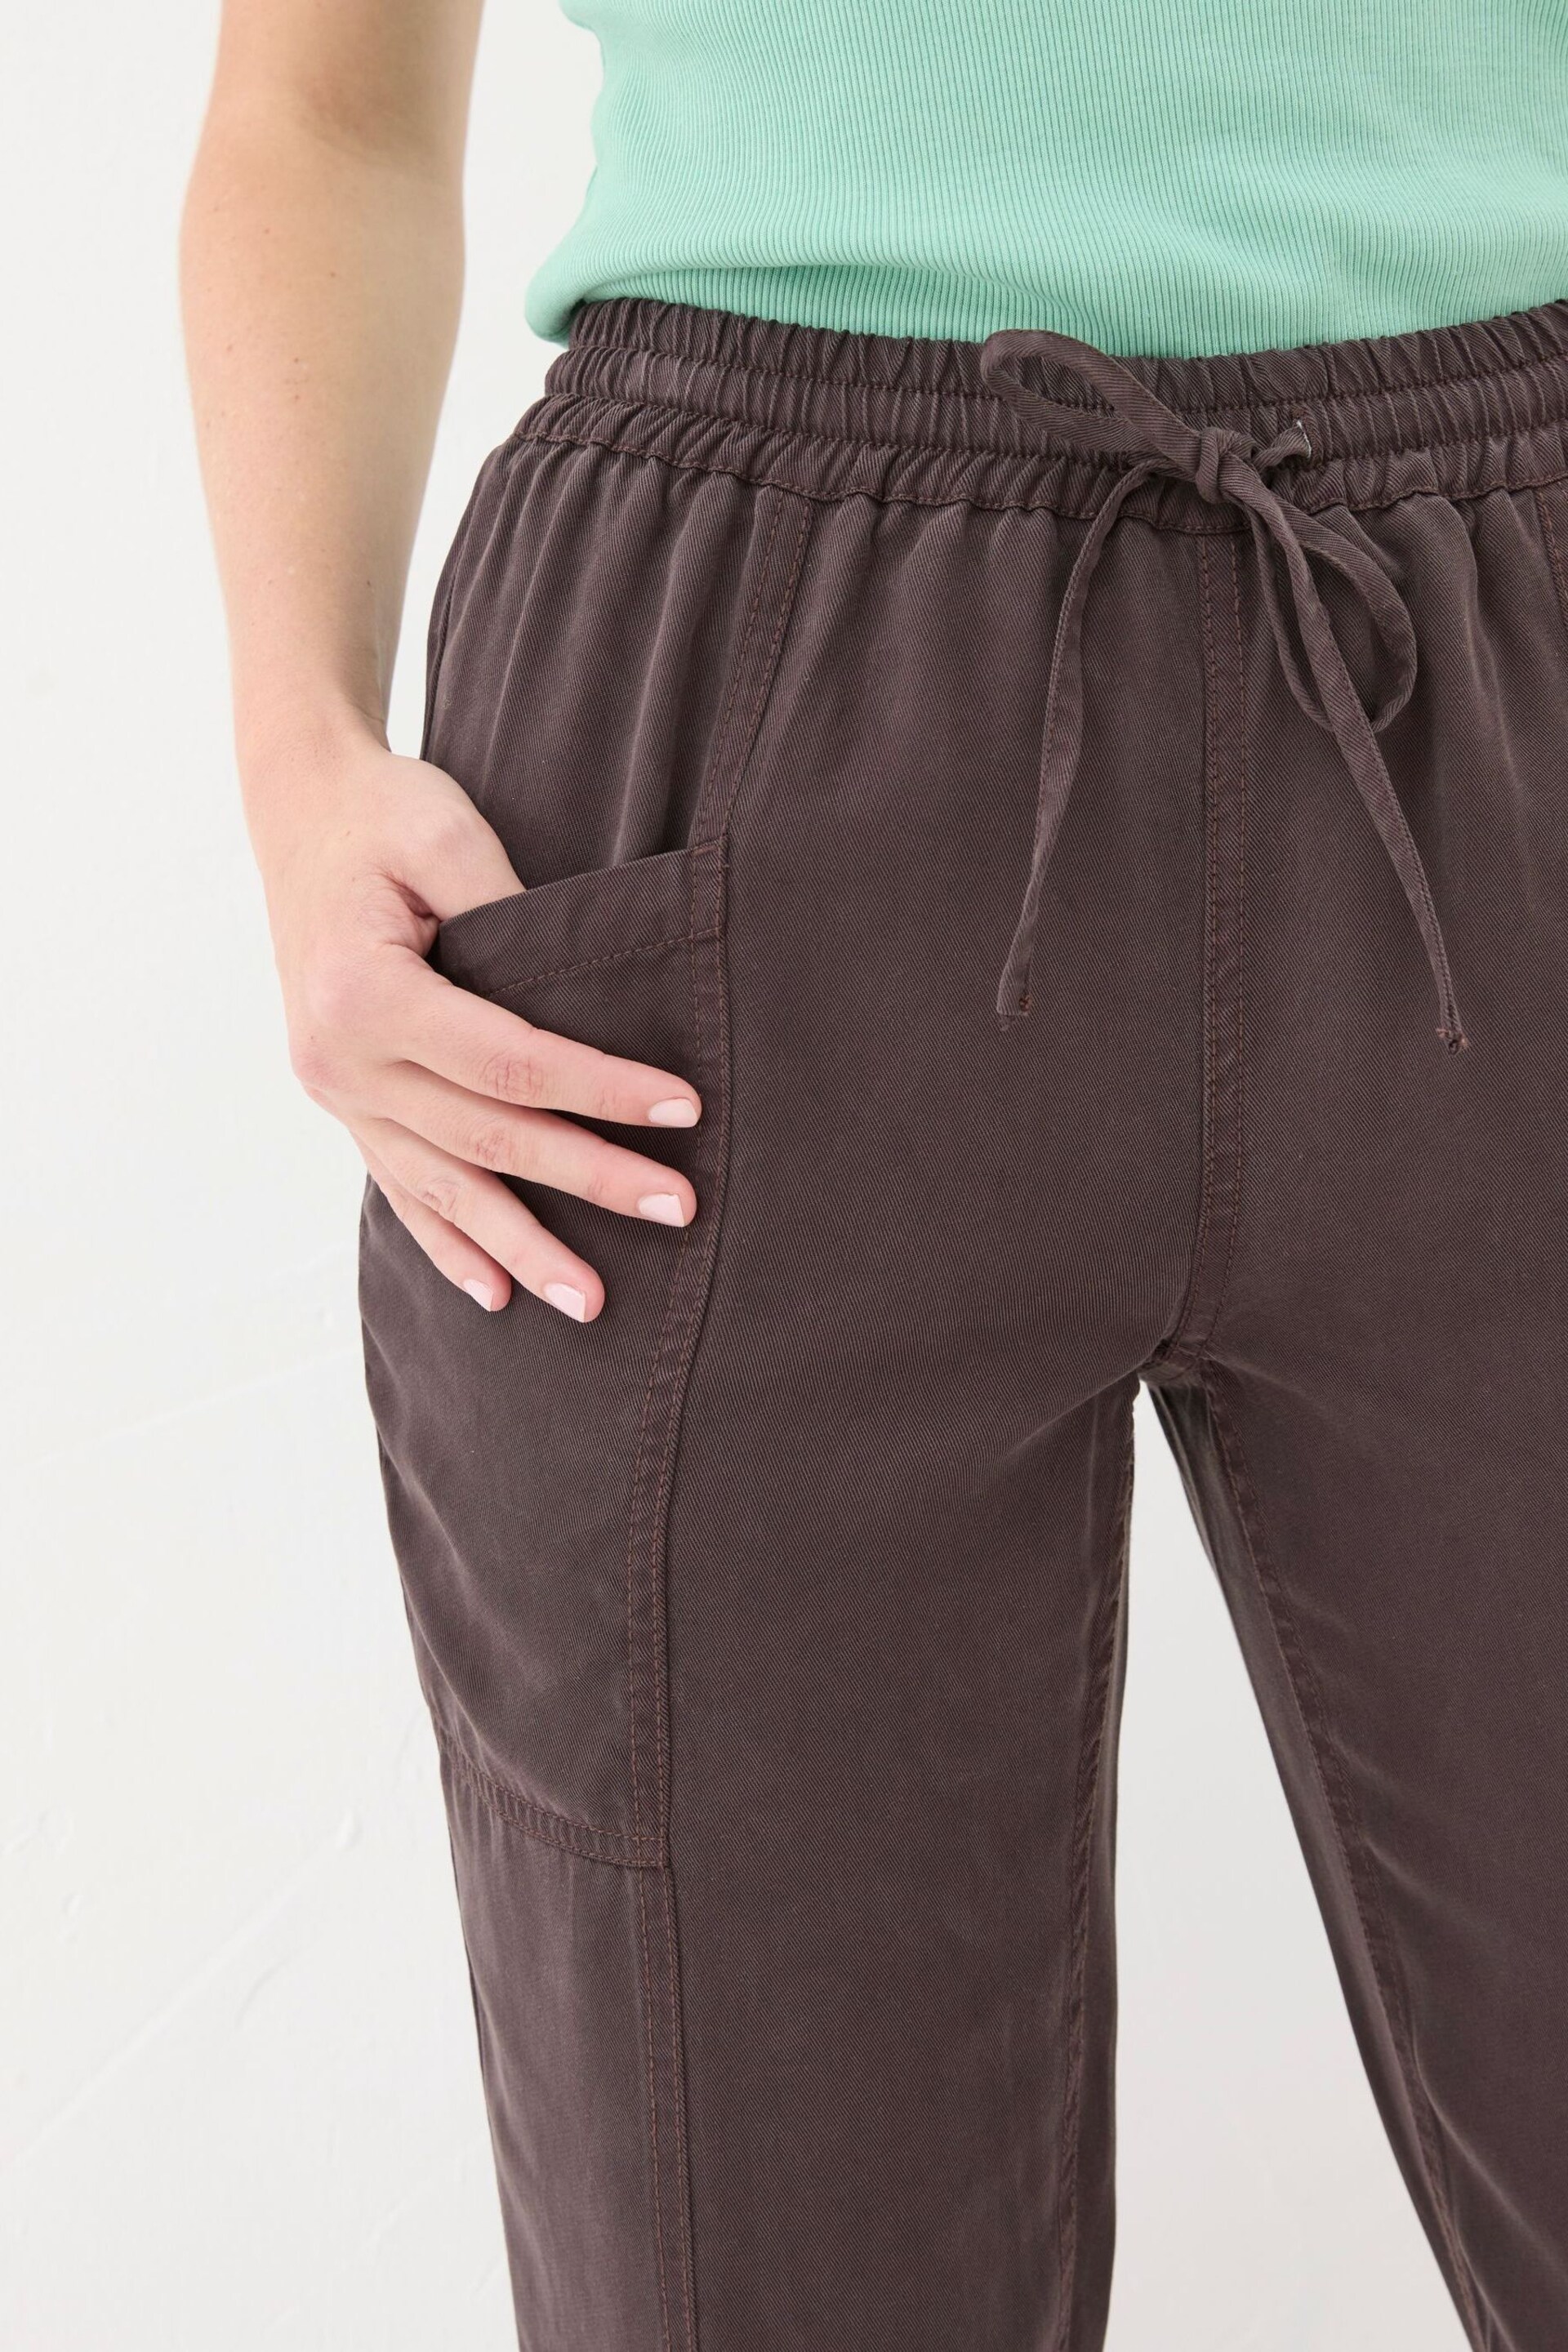 FatFace Brown Lyme Cargo Cuffed Joggers - Image 4 of 5